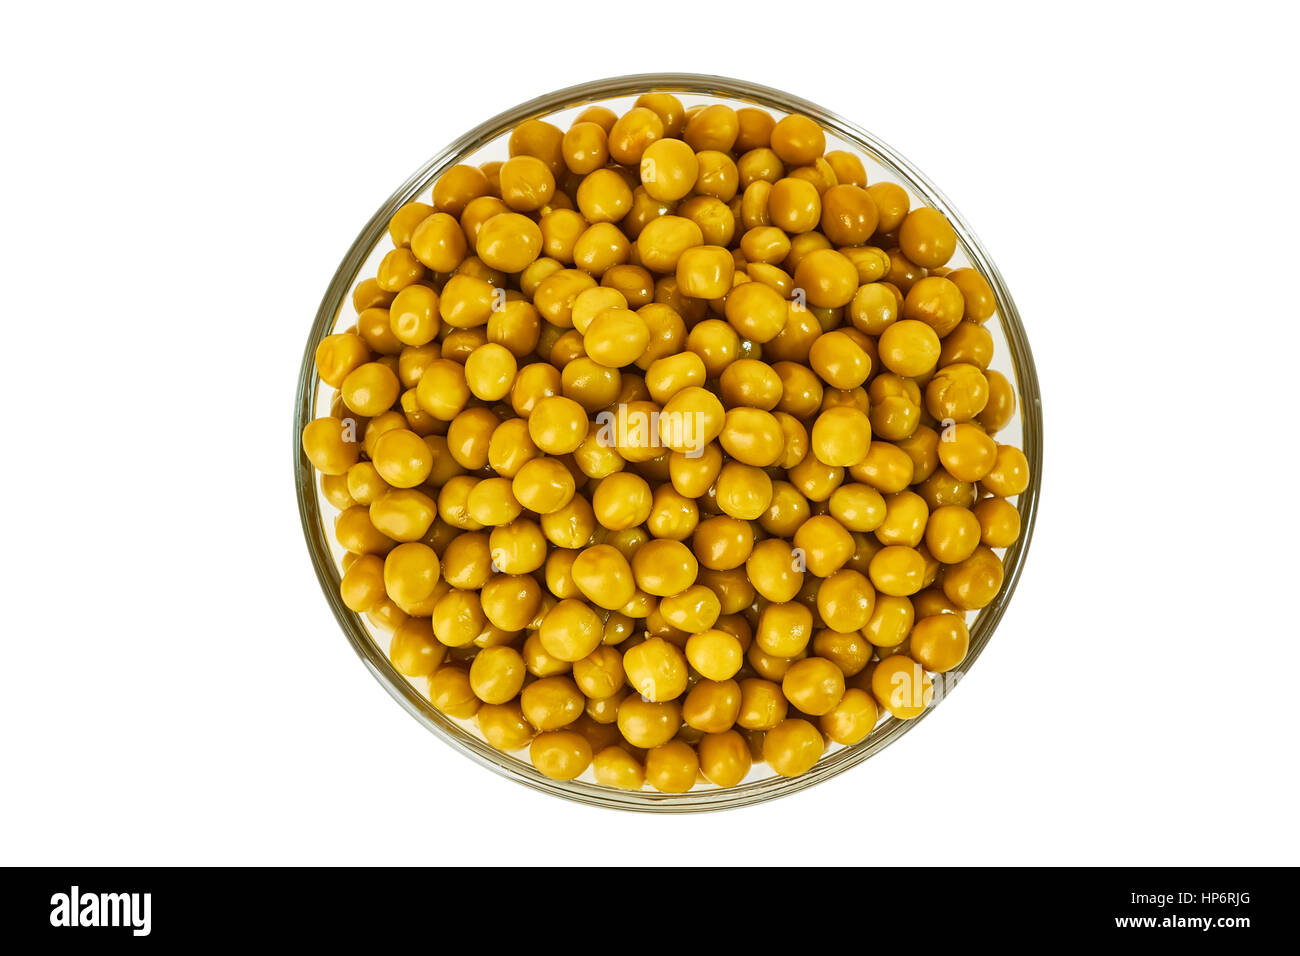 Glass bowl of pickled green pea on white Stock Photo